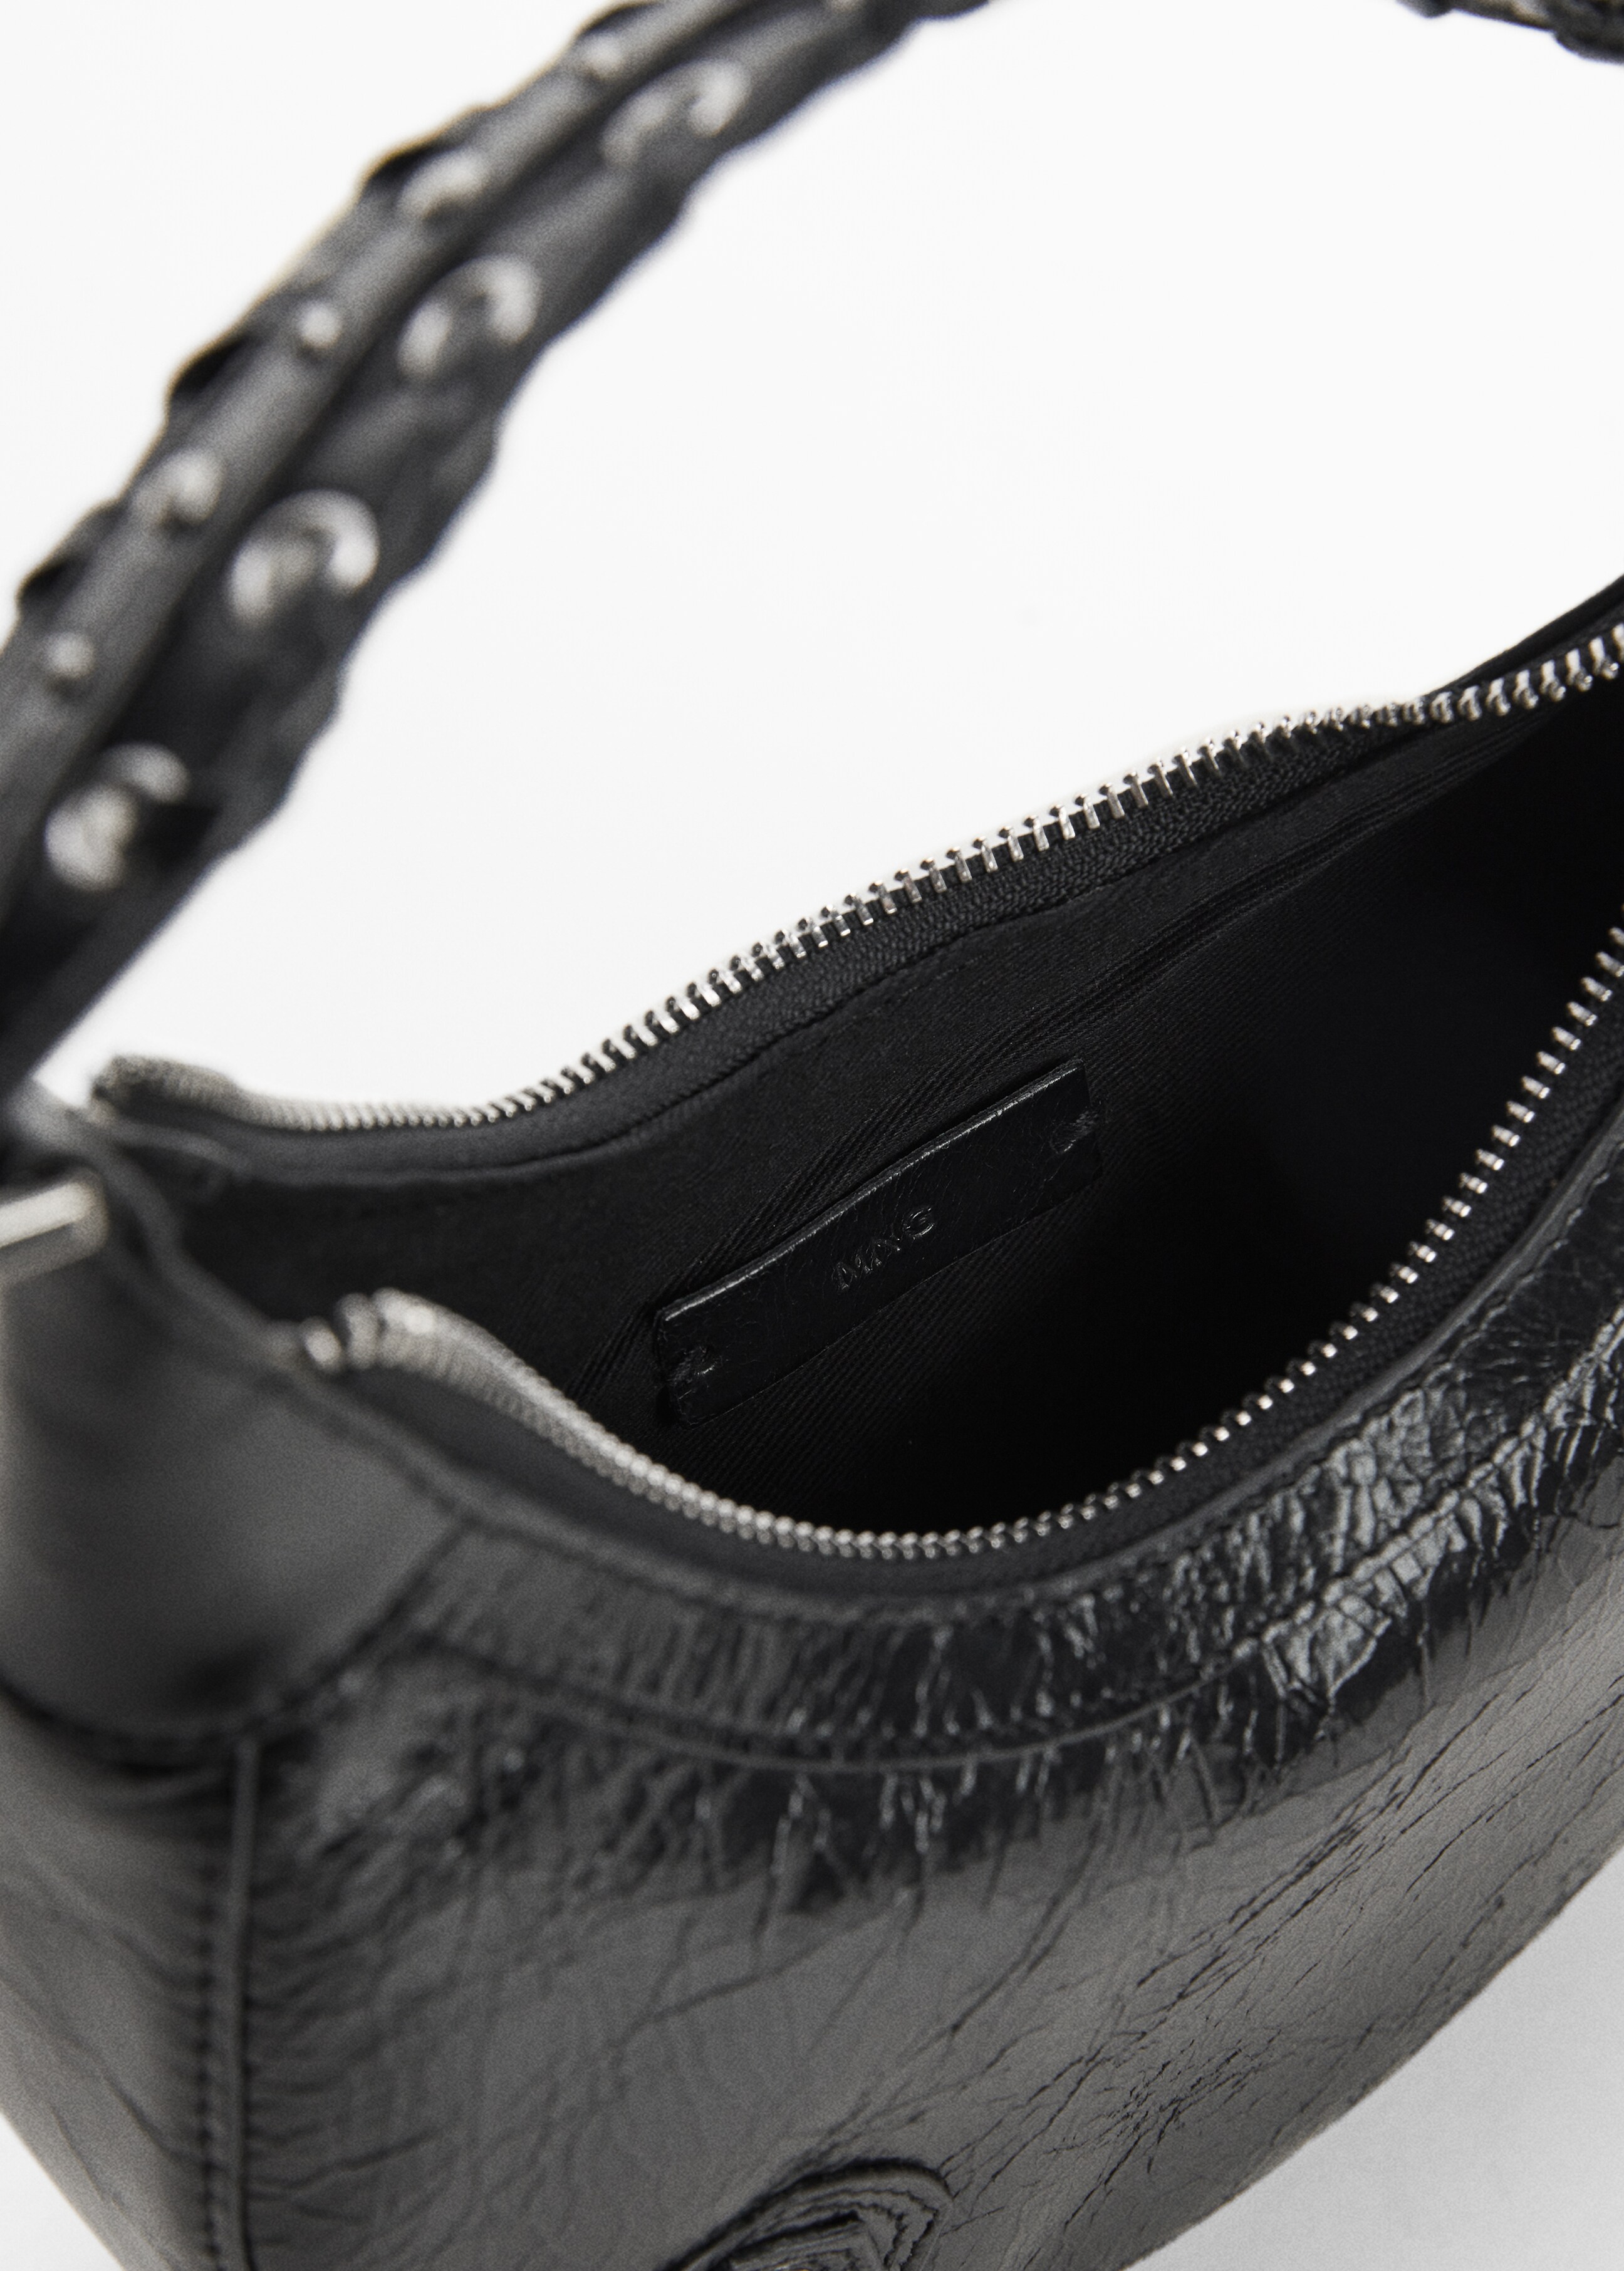 Leather bag with buckle - Details of the article 1